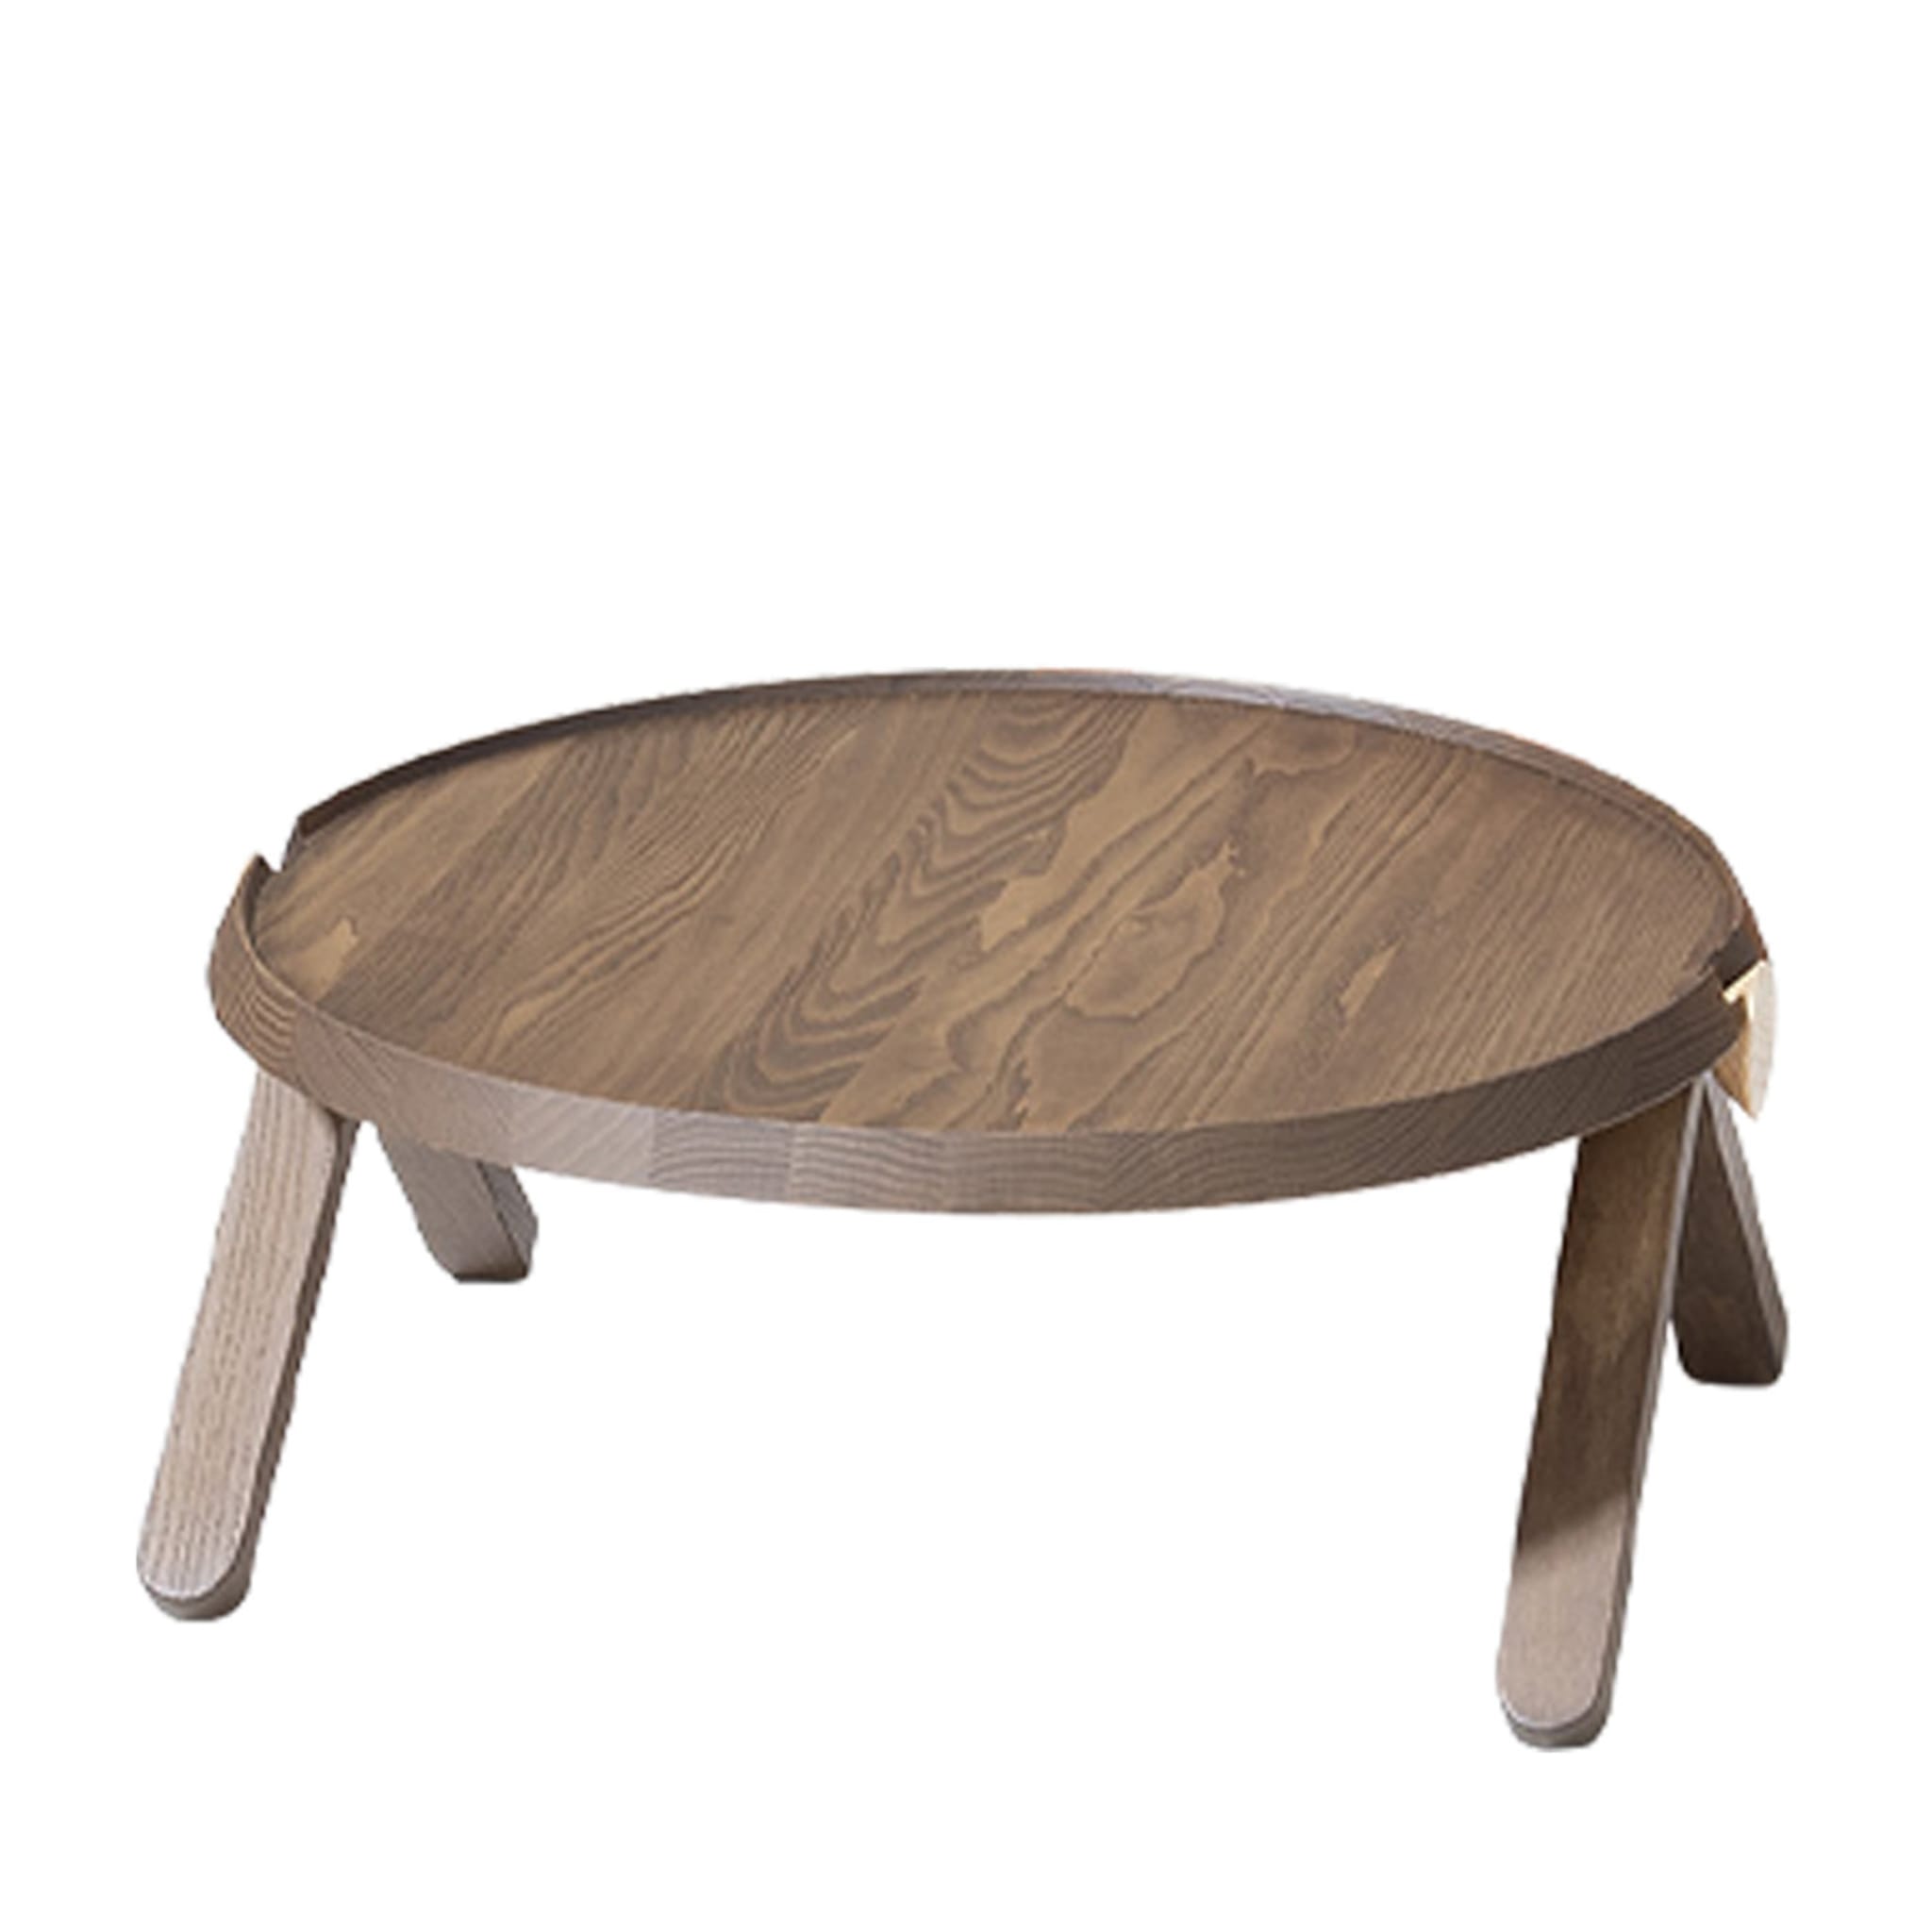 Lilliput 310 Brown Coffee Table by Studioventotto - Main view